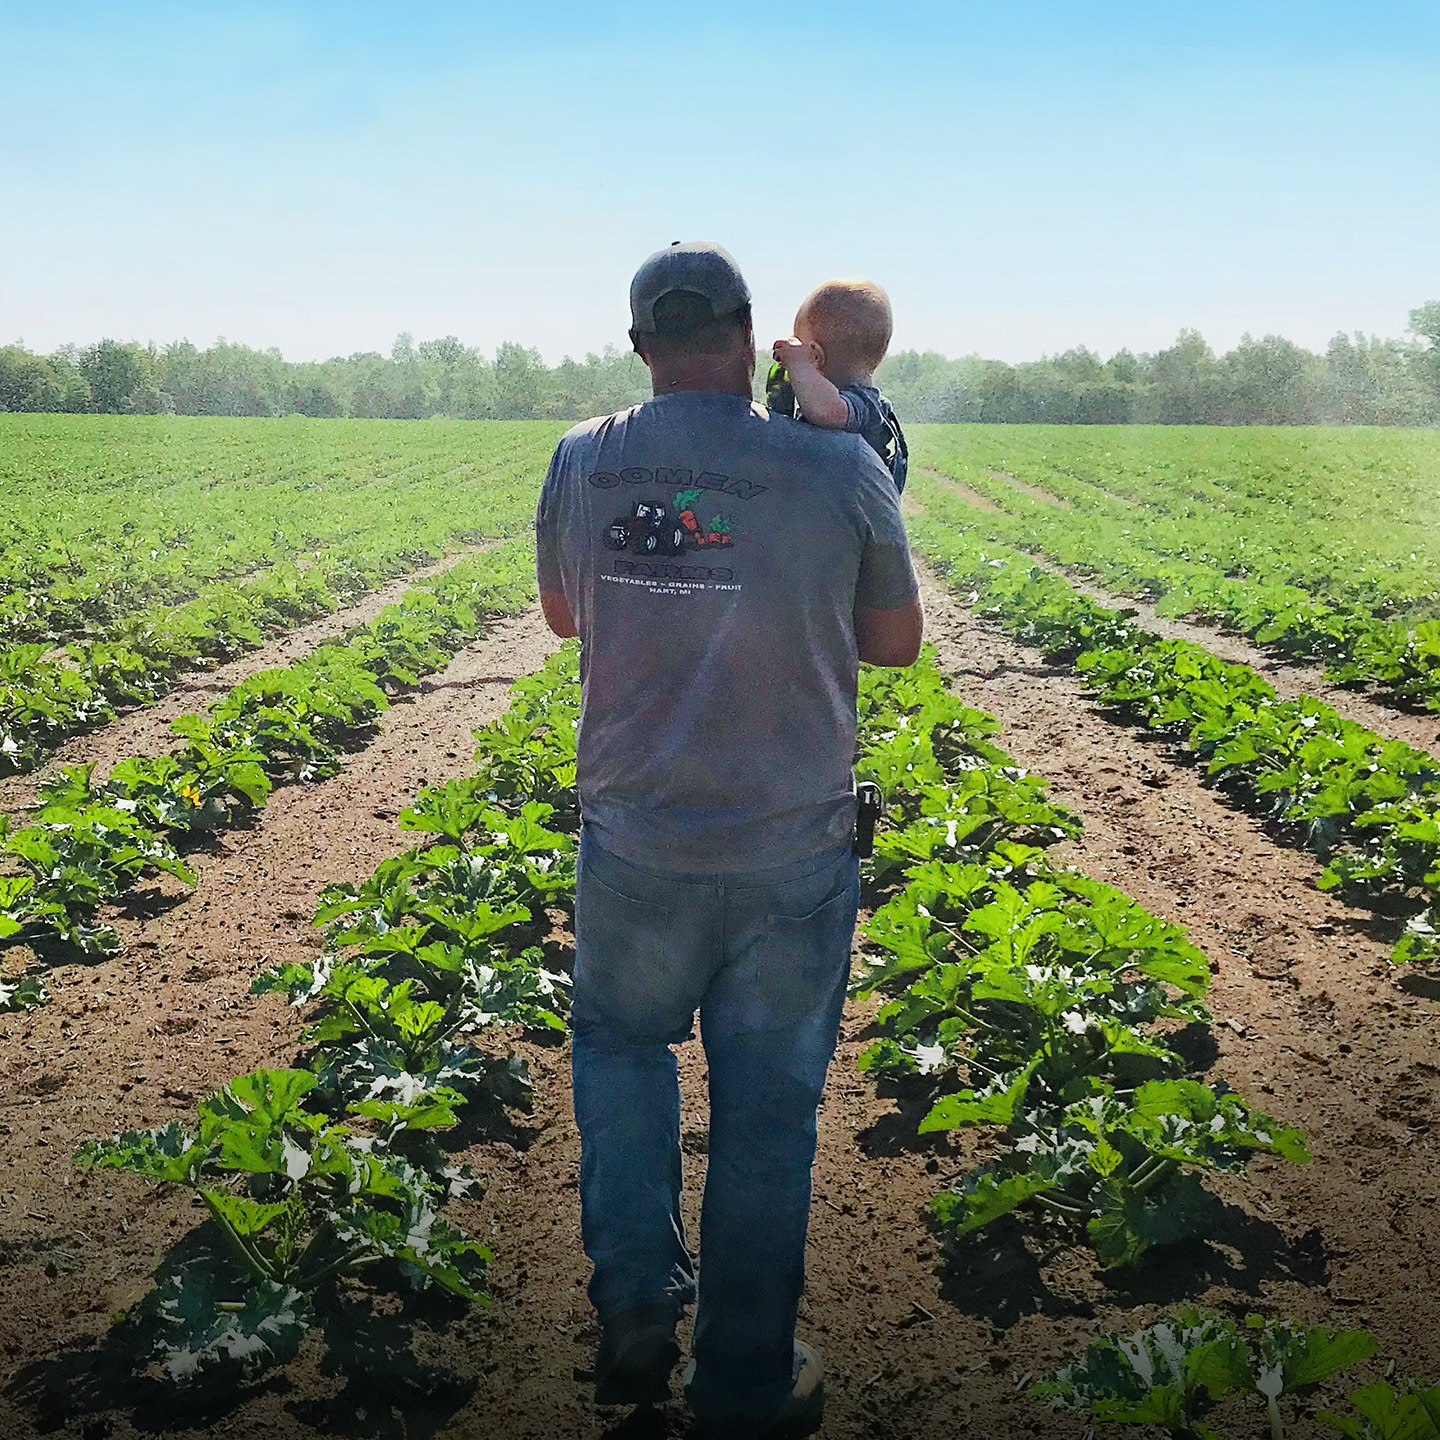 Father looking out at farmland while holding son in arms